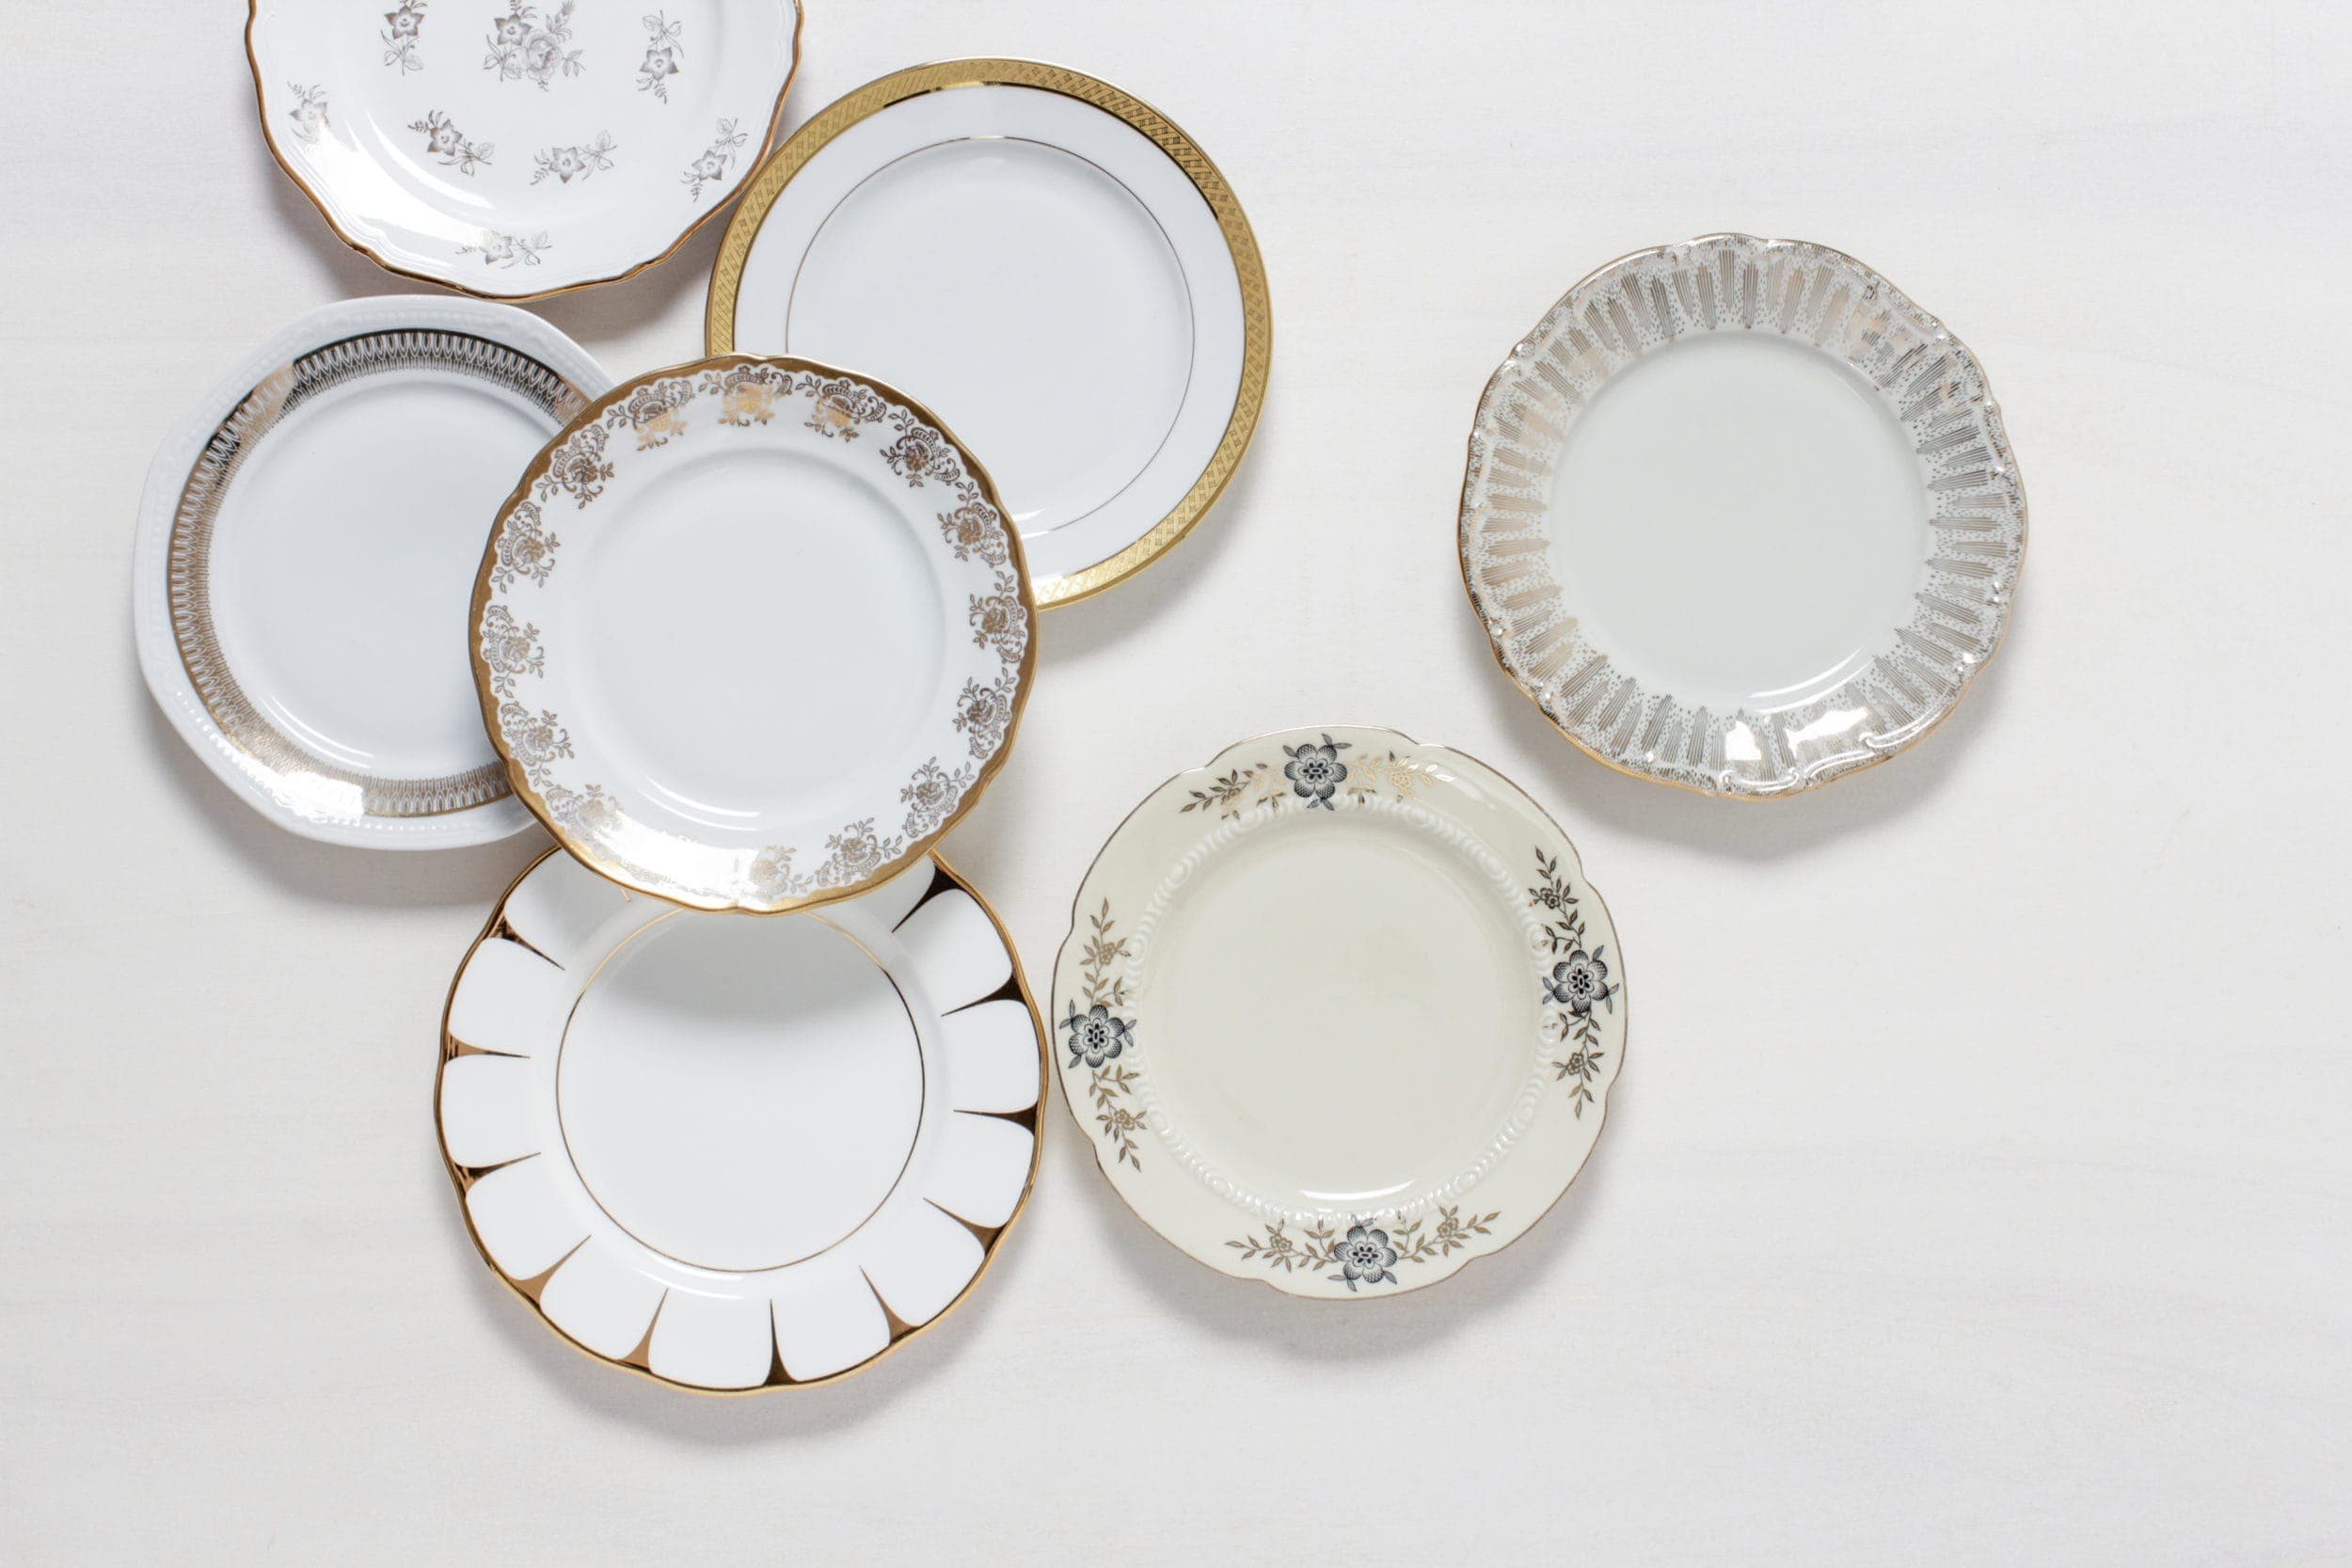 Dessert Plate Margarita Gold Mismatching | The Margarita dessert plate series consists of chic vintage plates. The plates are made of white or ivory-coloured porcelain and decorated with wonderful gold decorations.The combination of golden, playful patterns and elegant lines make this series so special.Whether in a comfortable armchair, at an entertaining wedding party, at a long party table or outside in the shade during a birthday - the Margarita cake plates give a harmonious picture everywhere. | gotvintage Rental & Event Design